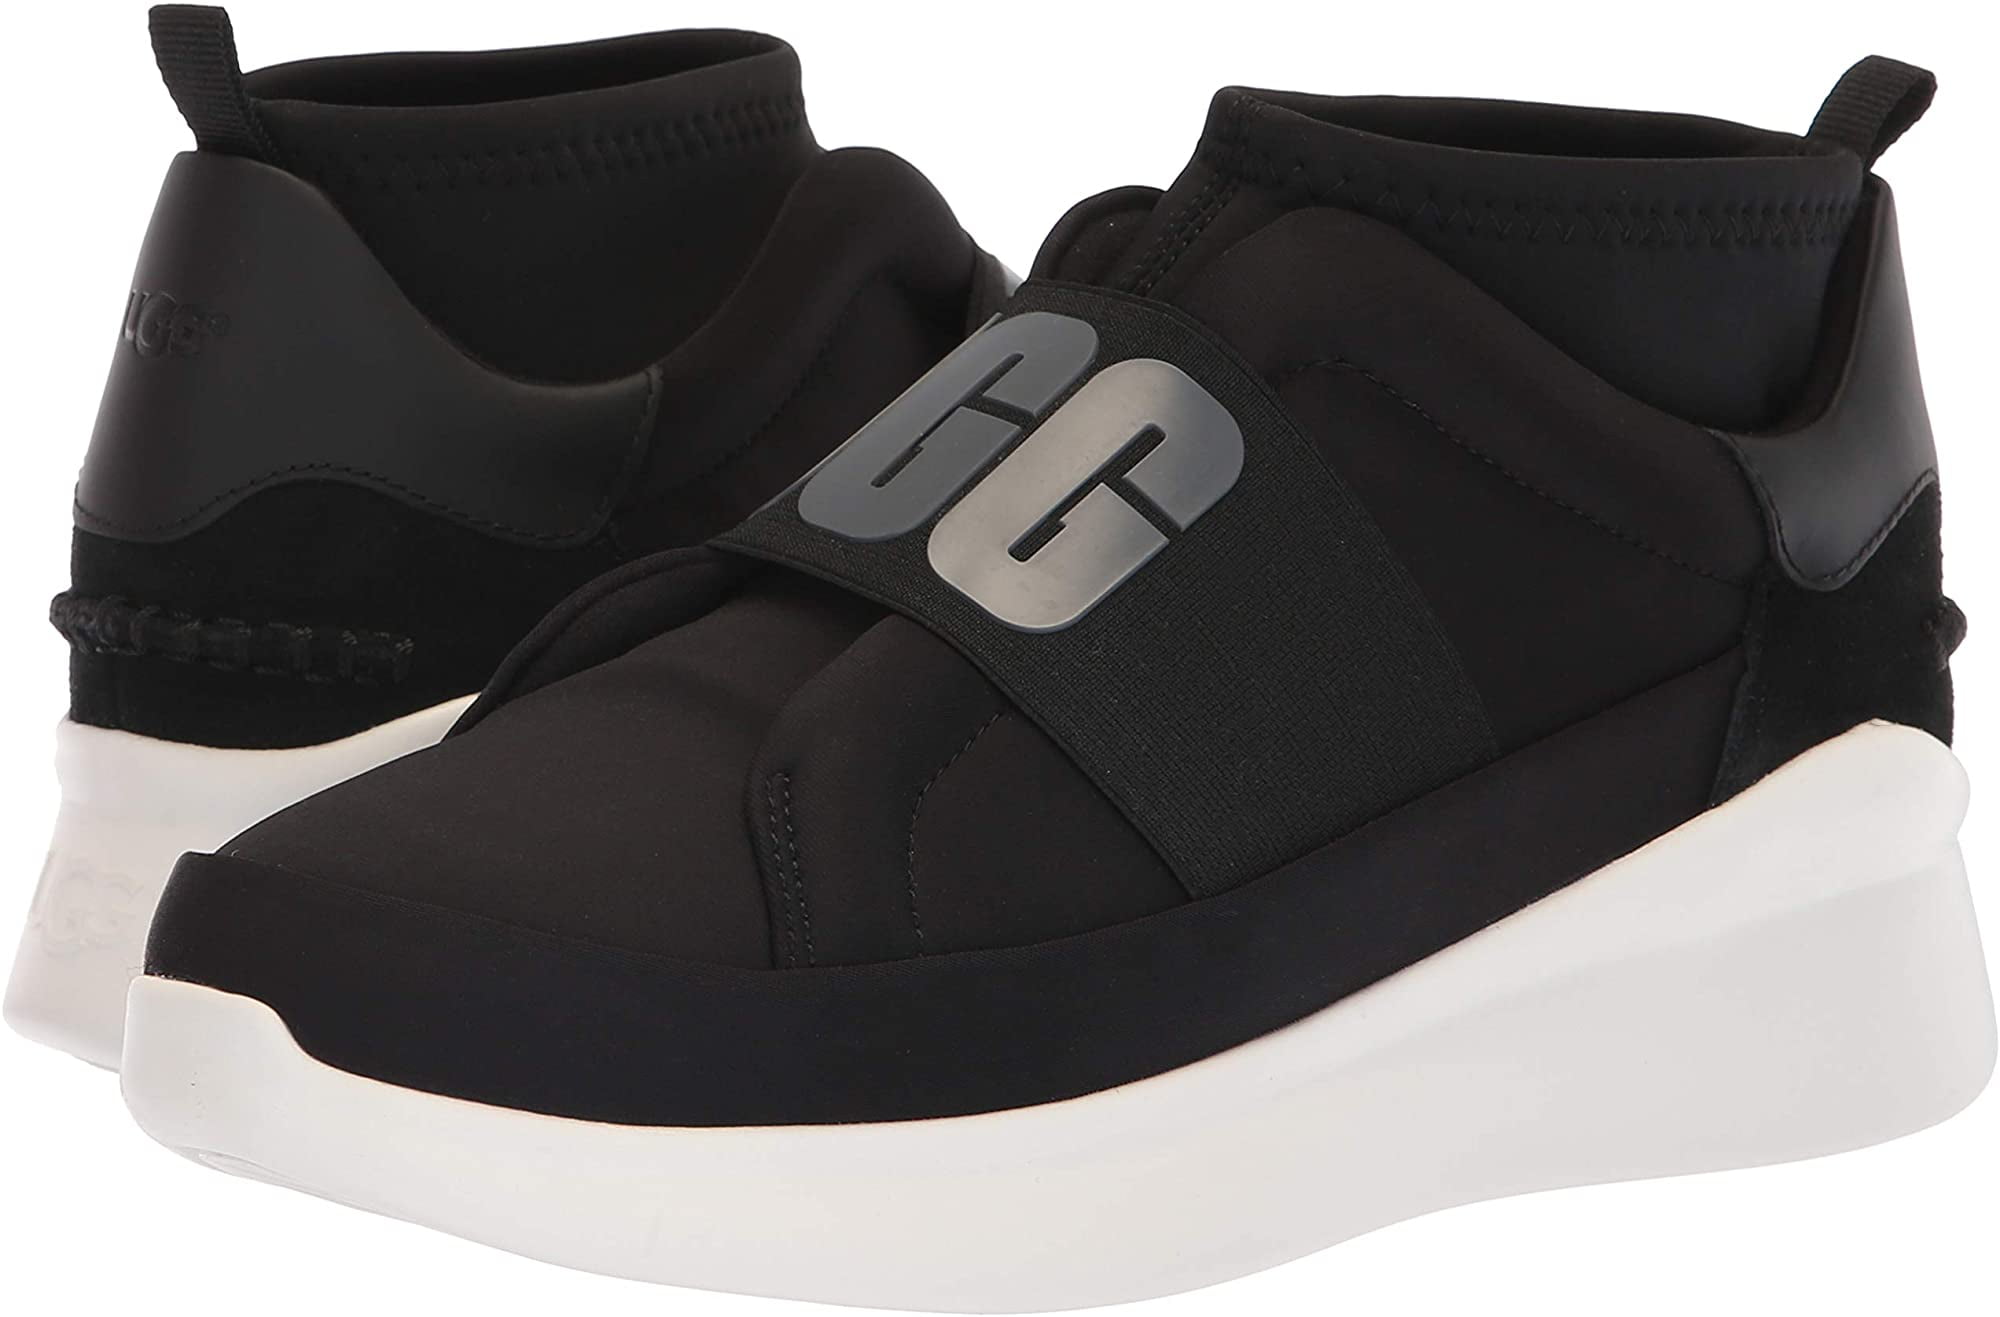 MA MAISON SHOES on Instagram: “🆒NEW ARRIVALS🆒 UGG: NEUTRA SNEAKER  CHARCOAL & COCONUT MILK #ugg #neutra #sneaker #charcoal #coconutmilk #… |  Sneakers, Uggs, Shoes